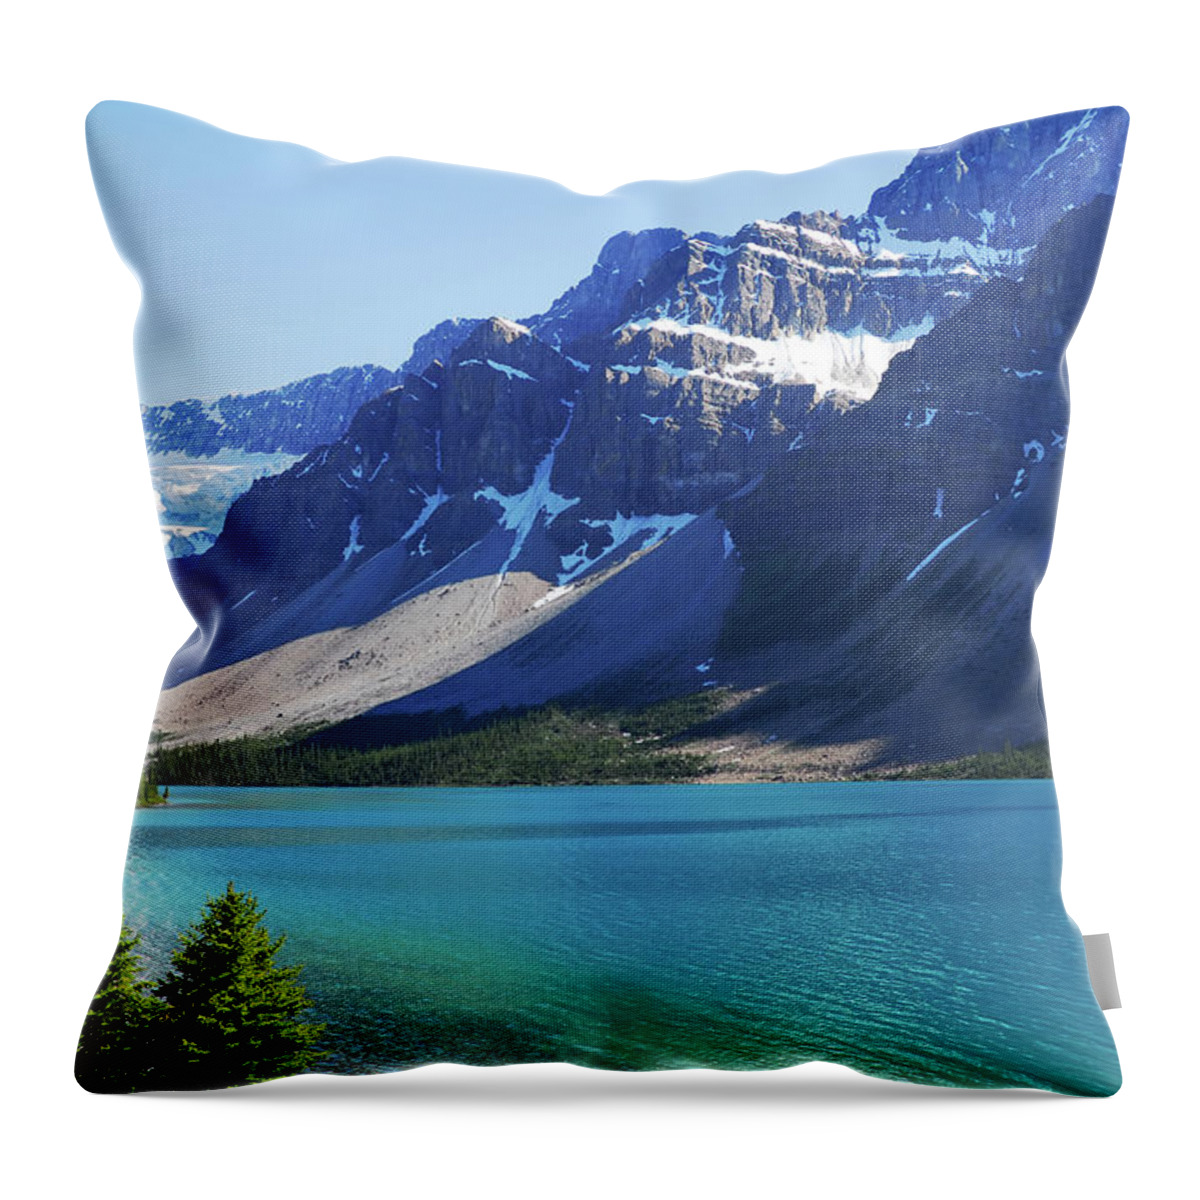 Scenics Throw Pillow featuring the photograph Beautiful, Serene Bow Lake Beside Snow by Brytta